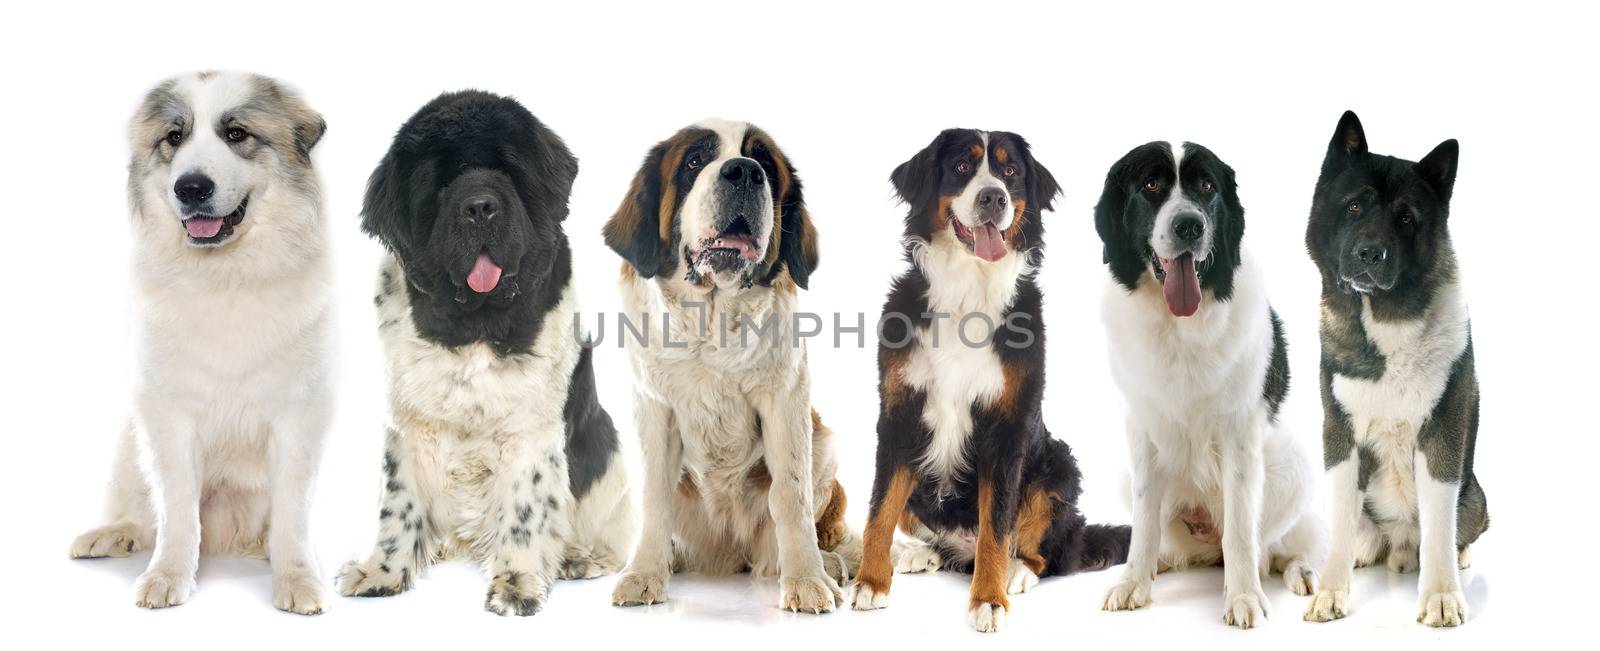 group of large dogs in front of white background